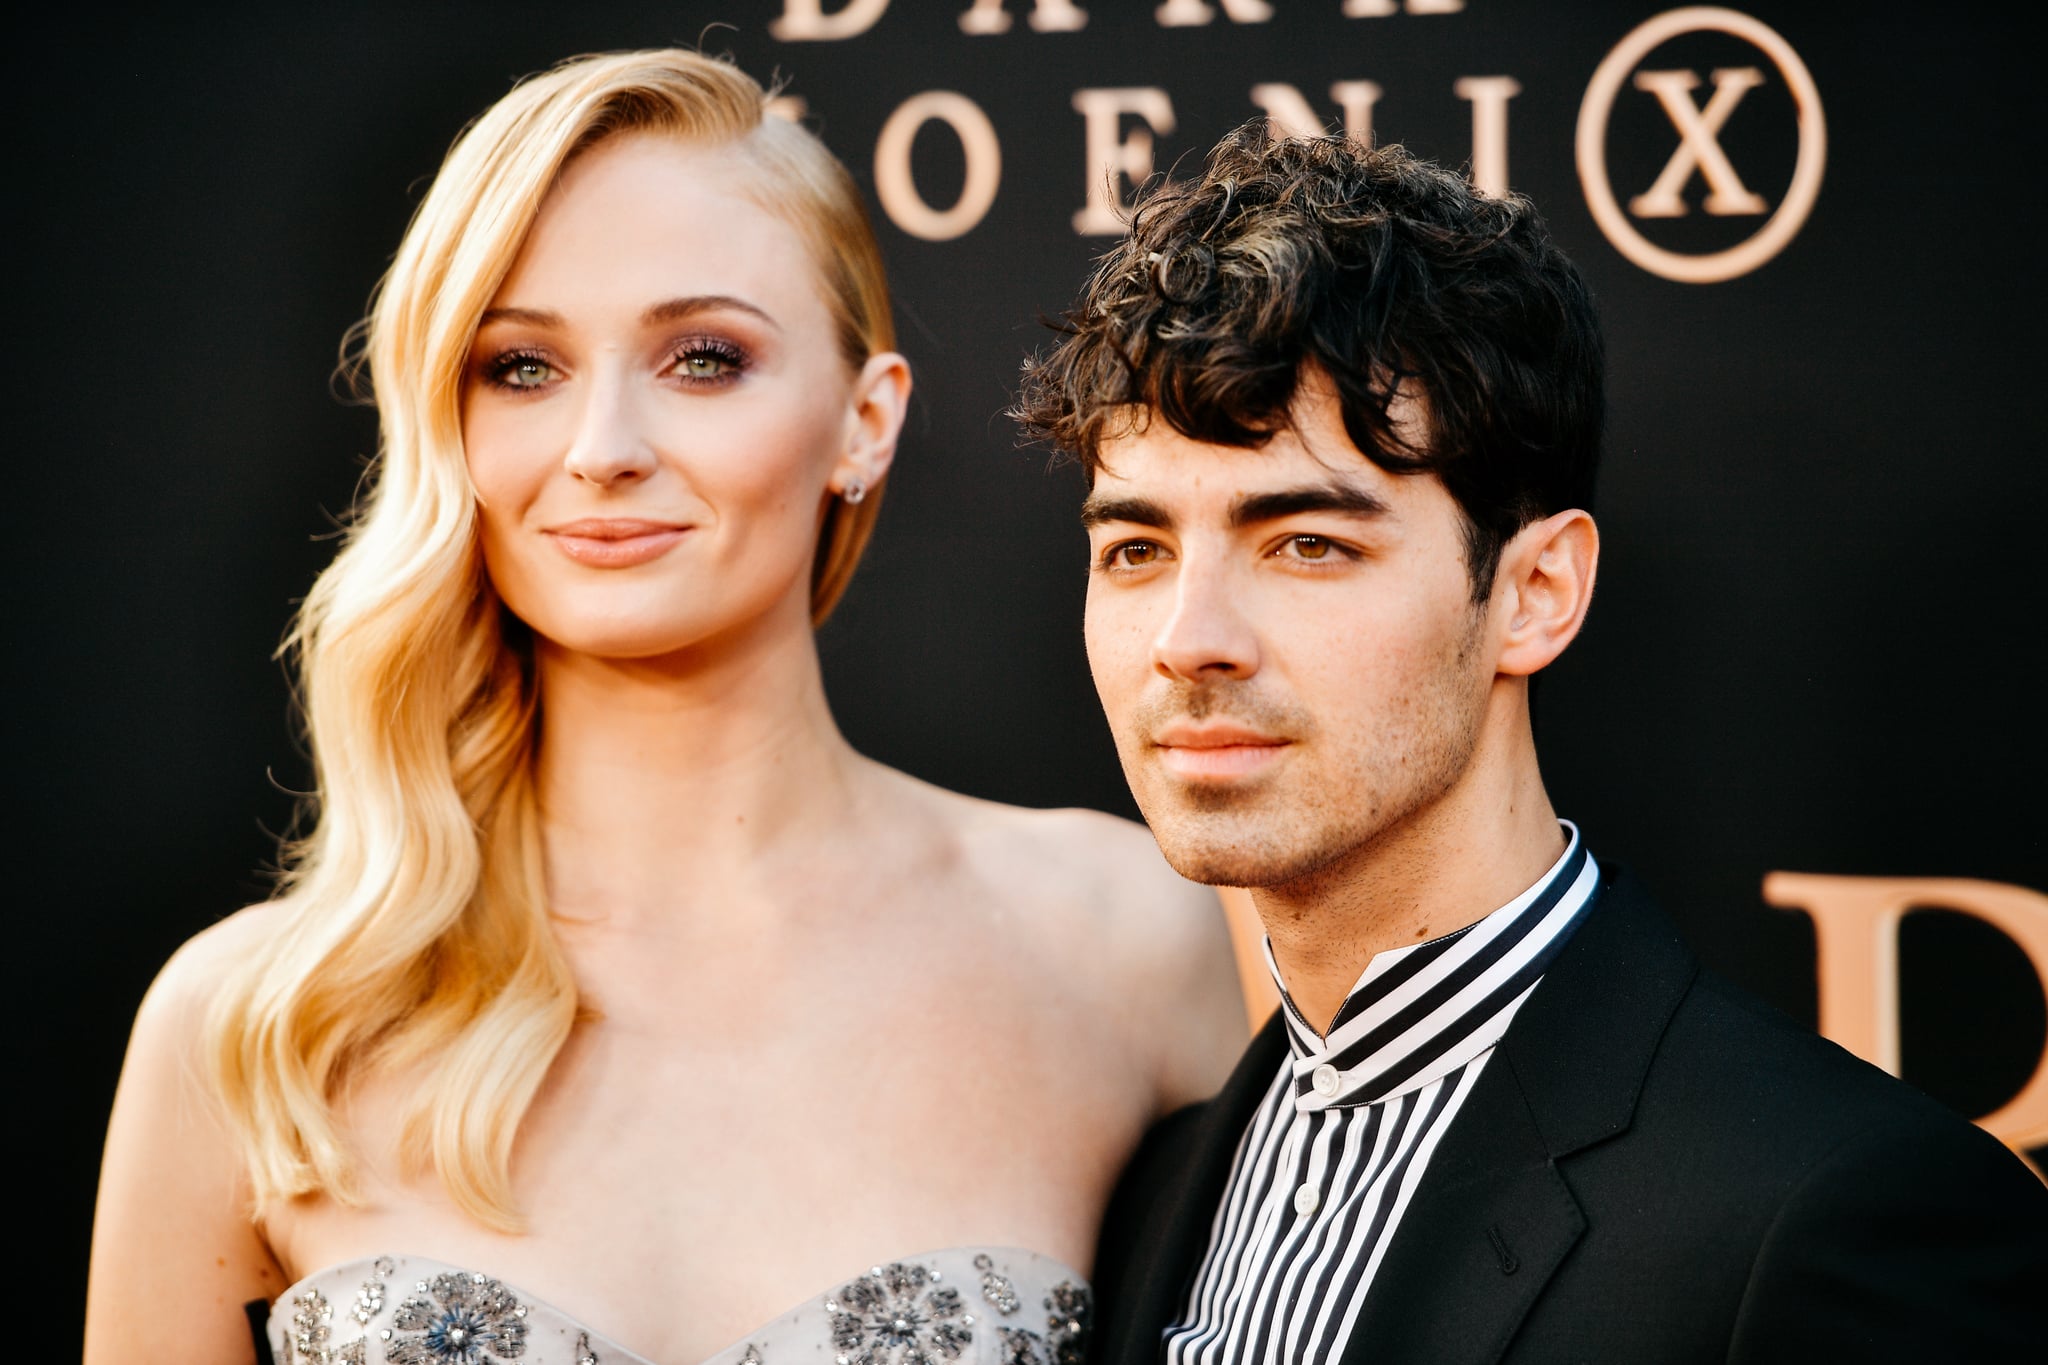 HOLLYWOOD, CALIFORNIA - JUNE 04: (EDITORS NOTE: Image has been processed using digital filters) Sophie Turner and Joe Jonas attend the premiere of 20th Century Fox